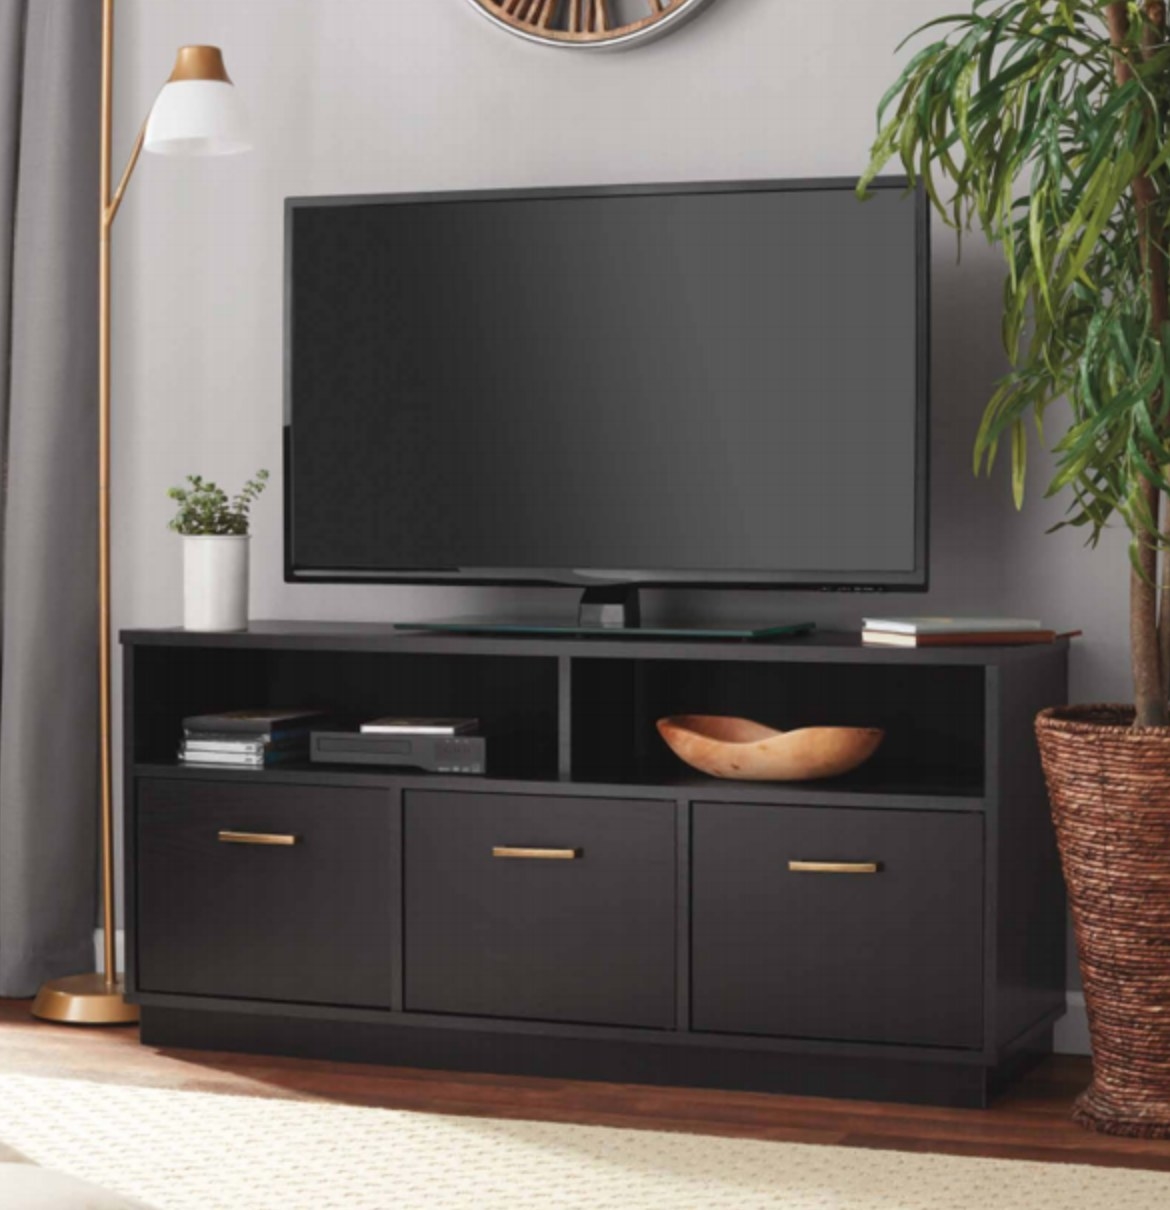 the black tv stand with three cubbies and two open shelves with a dvd player in the left shelf and a bowl in the right shelf